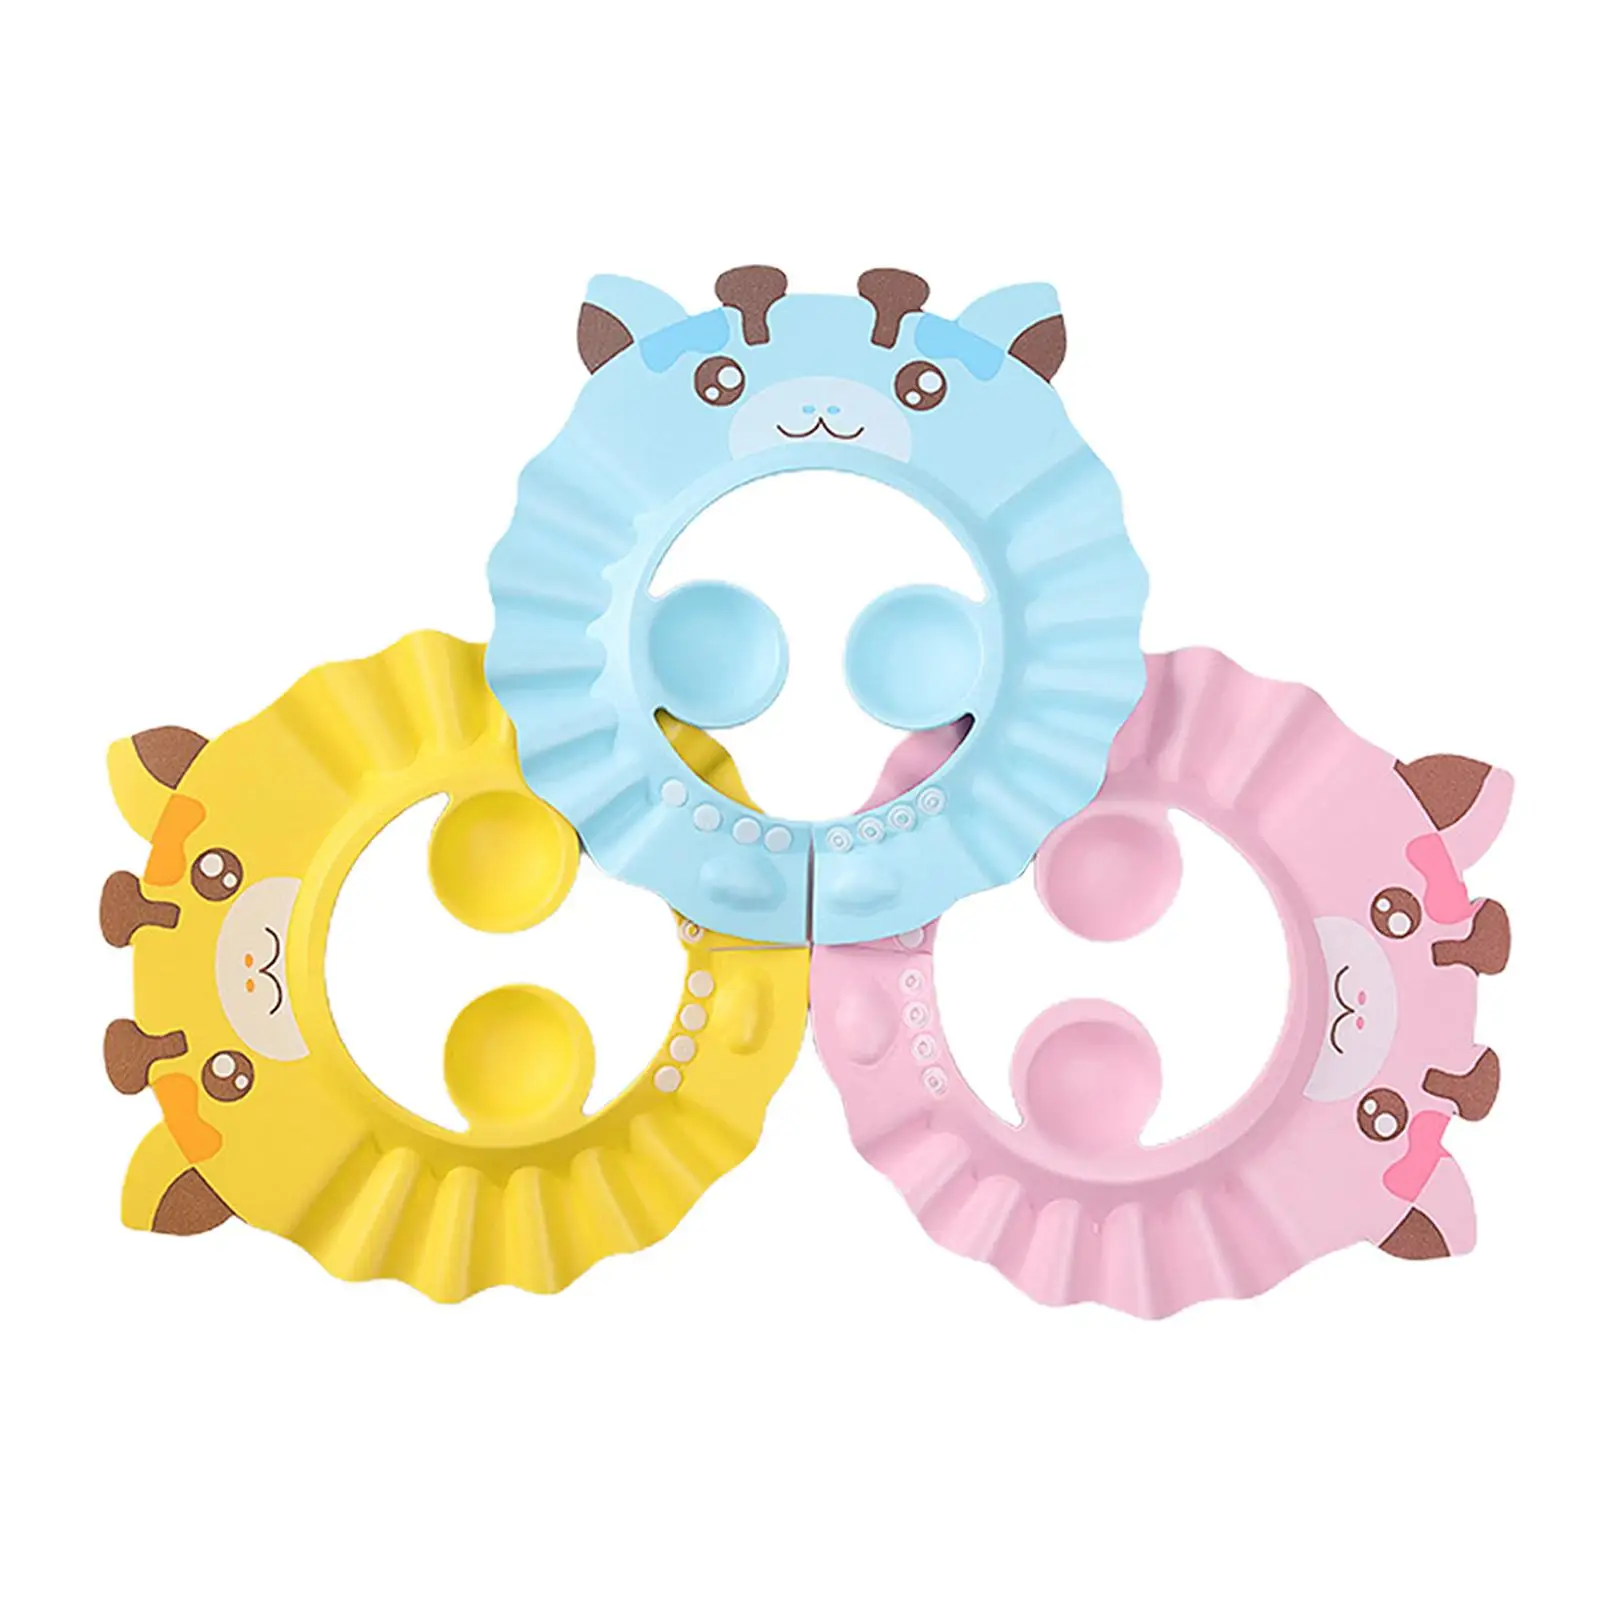 3x Adjustable Baby Bathing Caps for Babies Waterproof Shampoo for